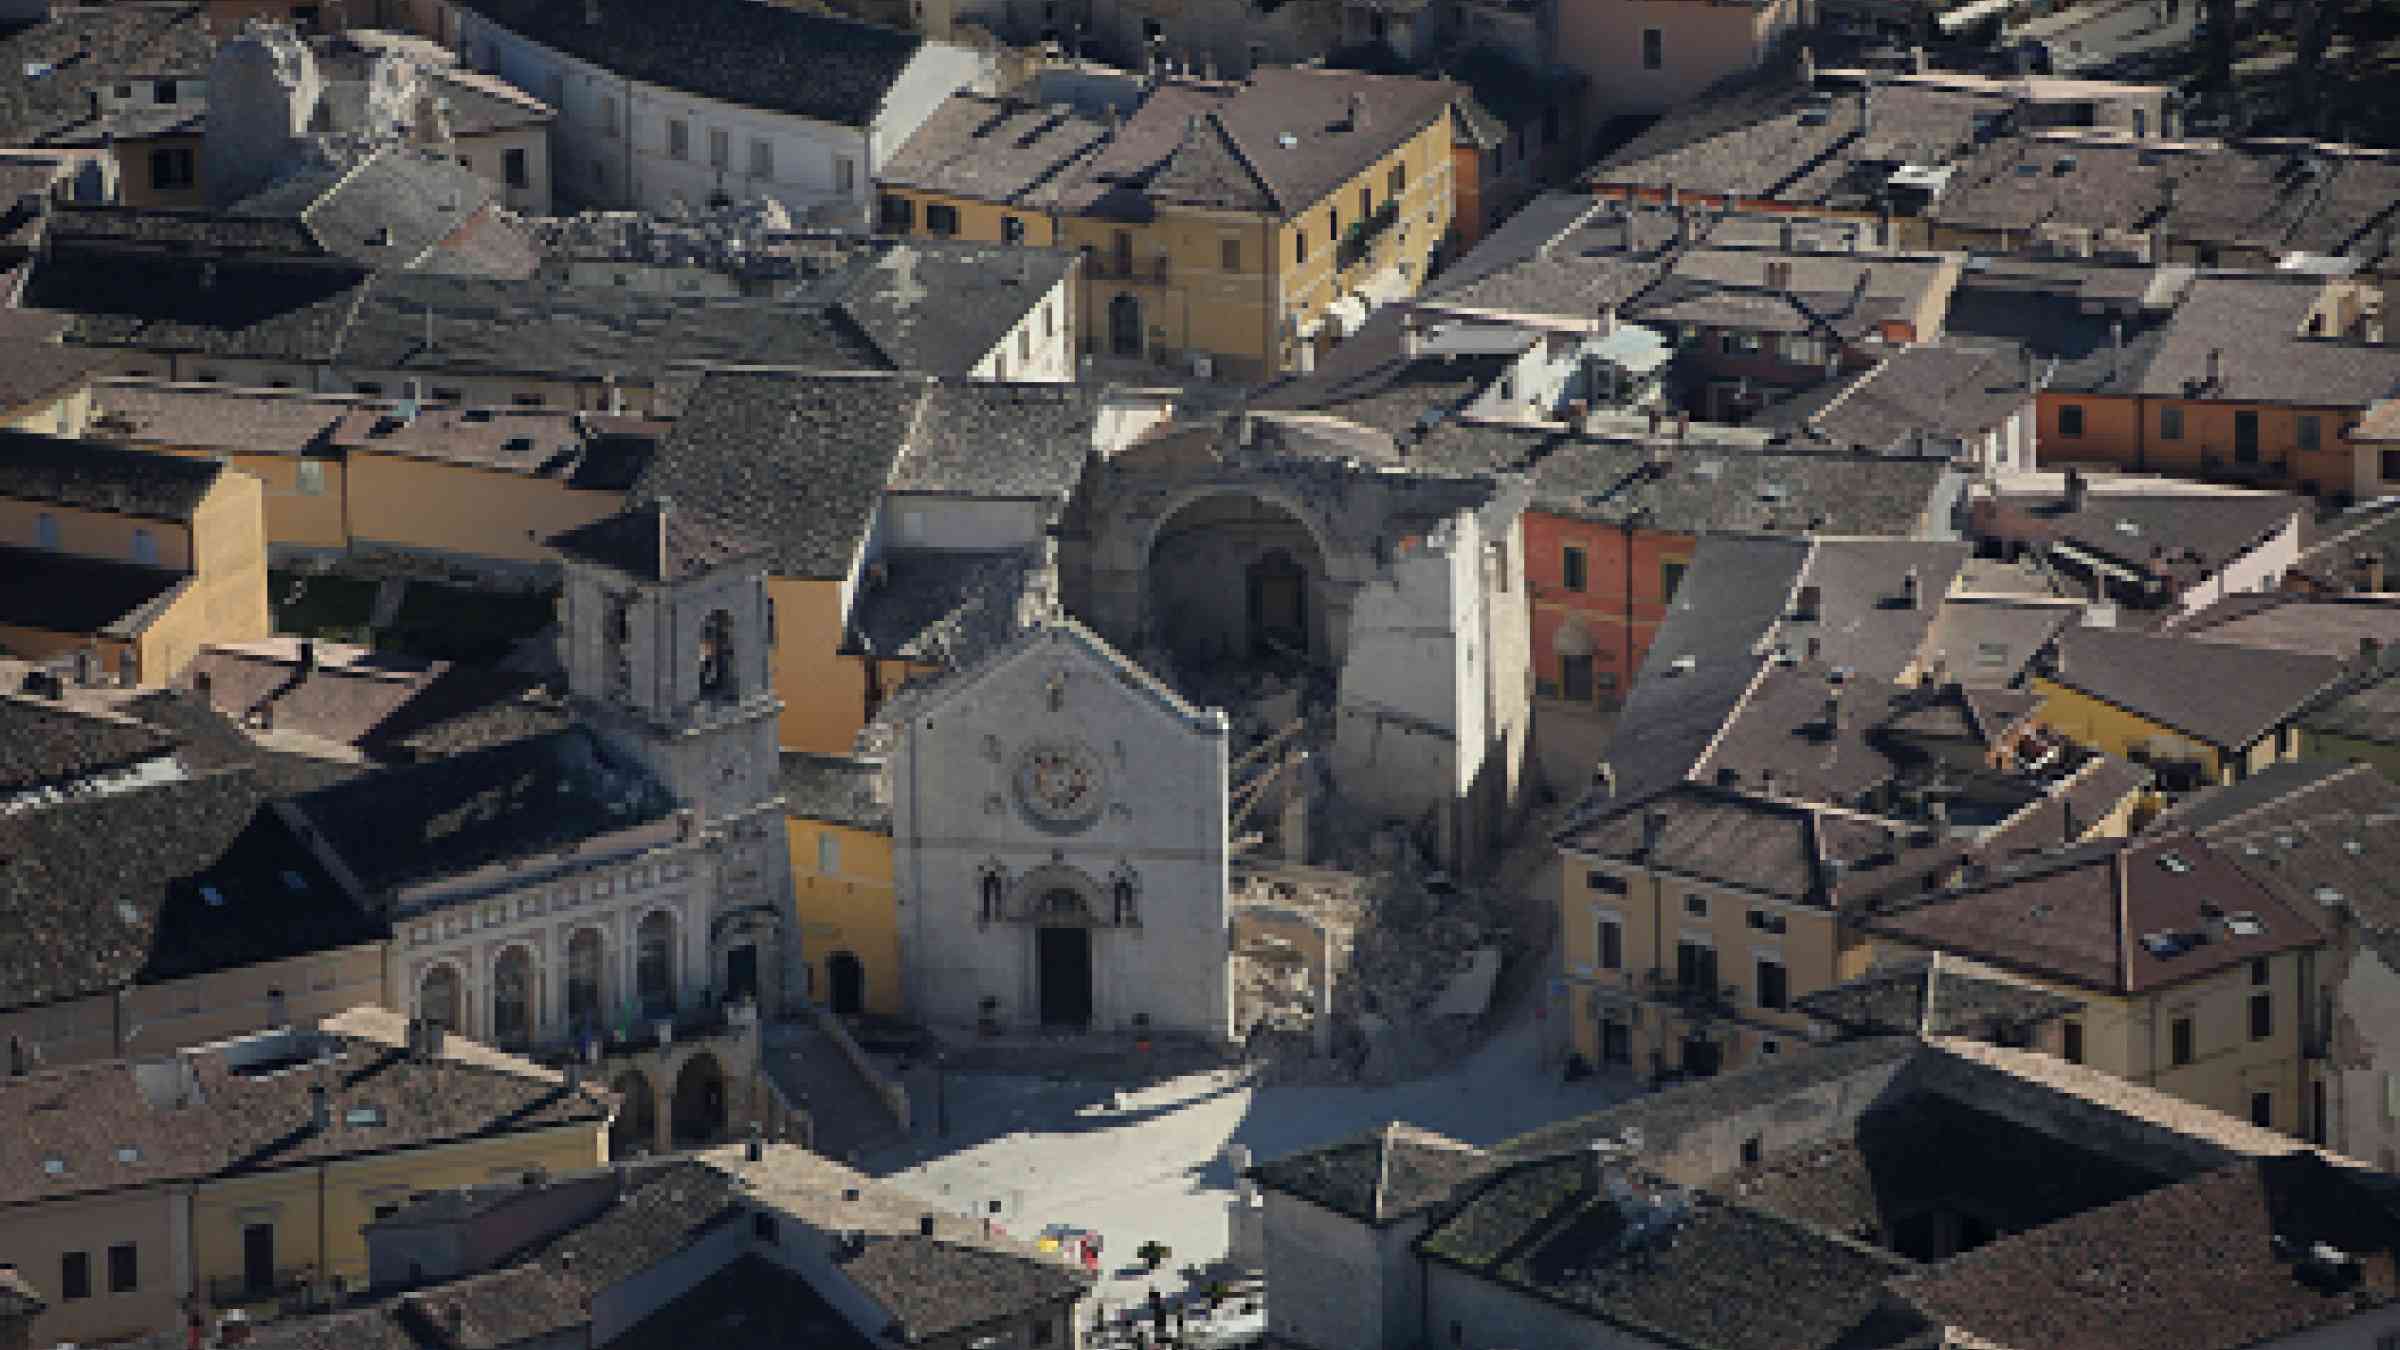 The destruction of the Basilica San Benedetto in the town of Norcia was emblematic of the cultural heritage impacts of the earthquakes in central Italy in 2016 (Photo: Italian Civil Protection Department)